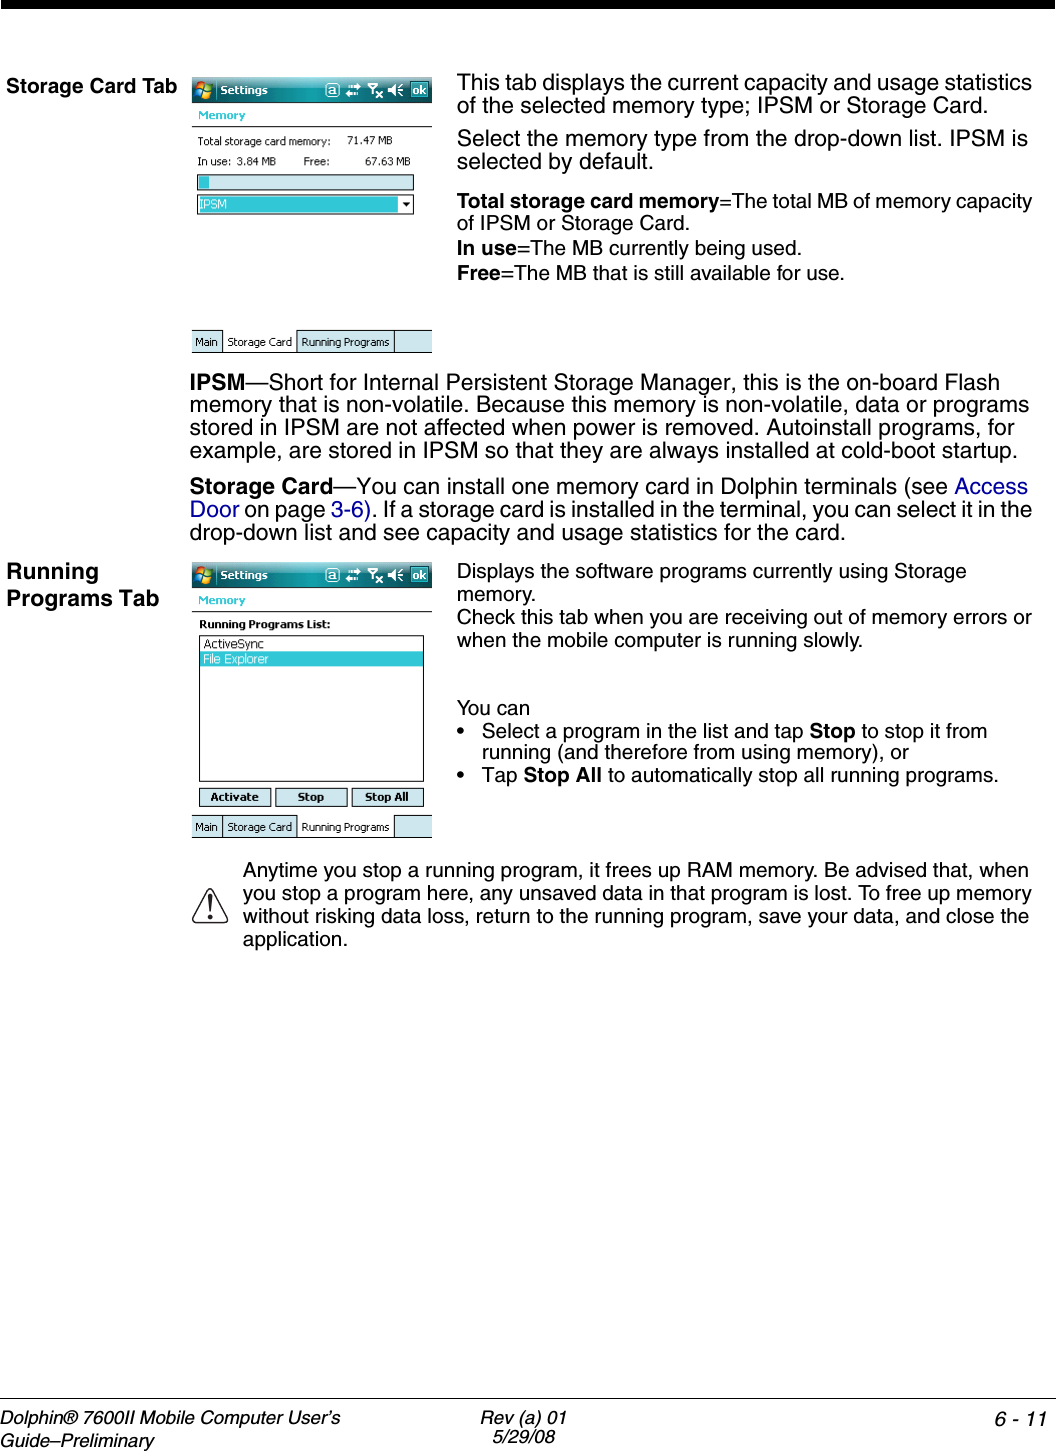 Dolphin® 7600II Mobile Computer User’s Guide–PreliminaryRev (a) 015/29/08 6 - 9ClearType TunerThis system setting enables you to adjust the level ClearType font rendering by moving a slider. The sample text displays the setting results immediately. Of course, you must first enable ClearType font rendering to change the appearance of fonts on the screen; see ClearType Tab on page 6-14.Clock &amp; AlarmsThis setting sets the system clock, which means that all scheduled items run according to this setting. The time and date need to be reset after every hard reset of the terminal so that the system clock is accurate.On the Today screen, tap the line that displays the time and date,The Clock Settings screen appears. The selected time sets the system clock.EncryptionEncryption gives you the option of encrypting files placed on storage cards to that those files cannot be read by any other device.Error ReportingError Reporting gives you the option of enabling or disabling the error reporting function of Windows Mobile 6.